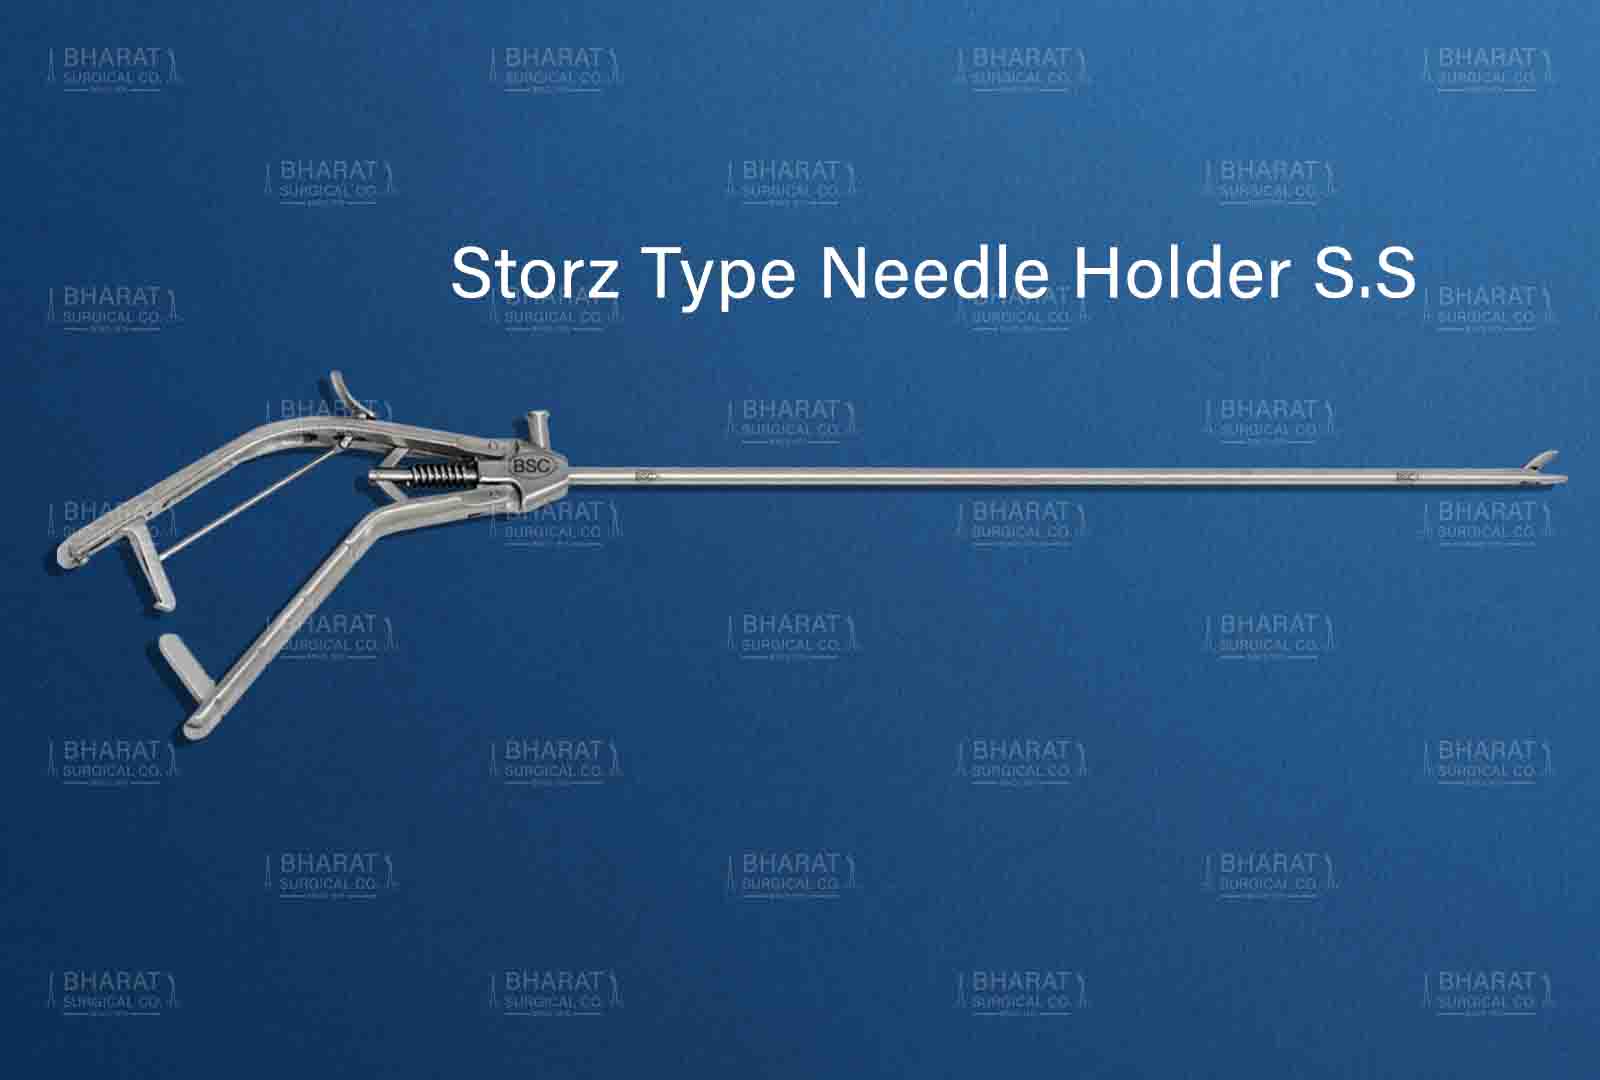 Storz-Type Needle Holder Curved manufacturer, supplier and exporter